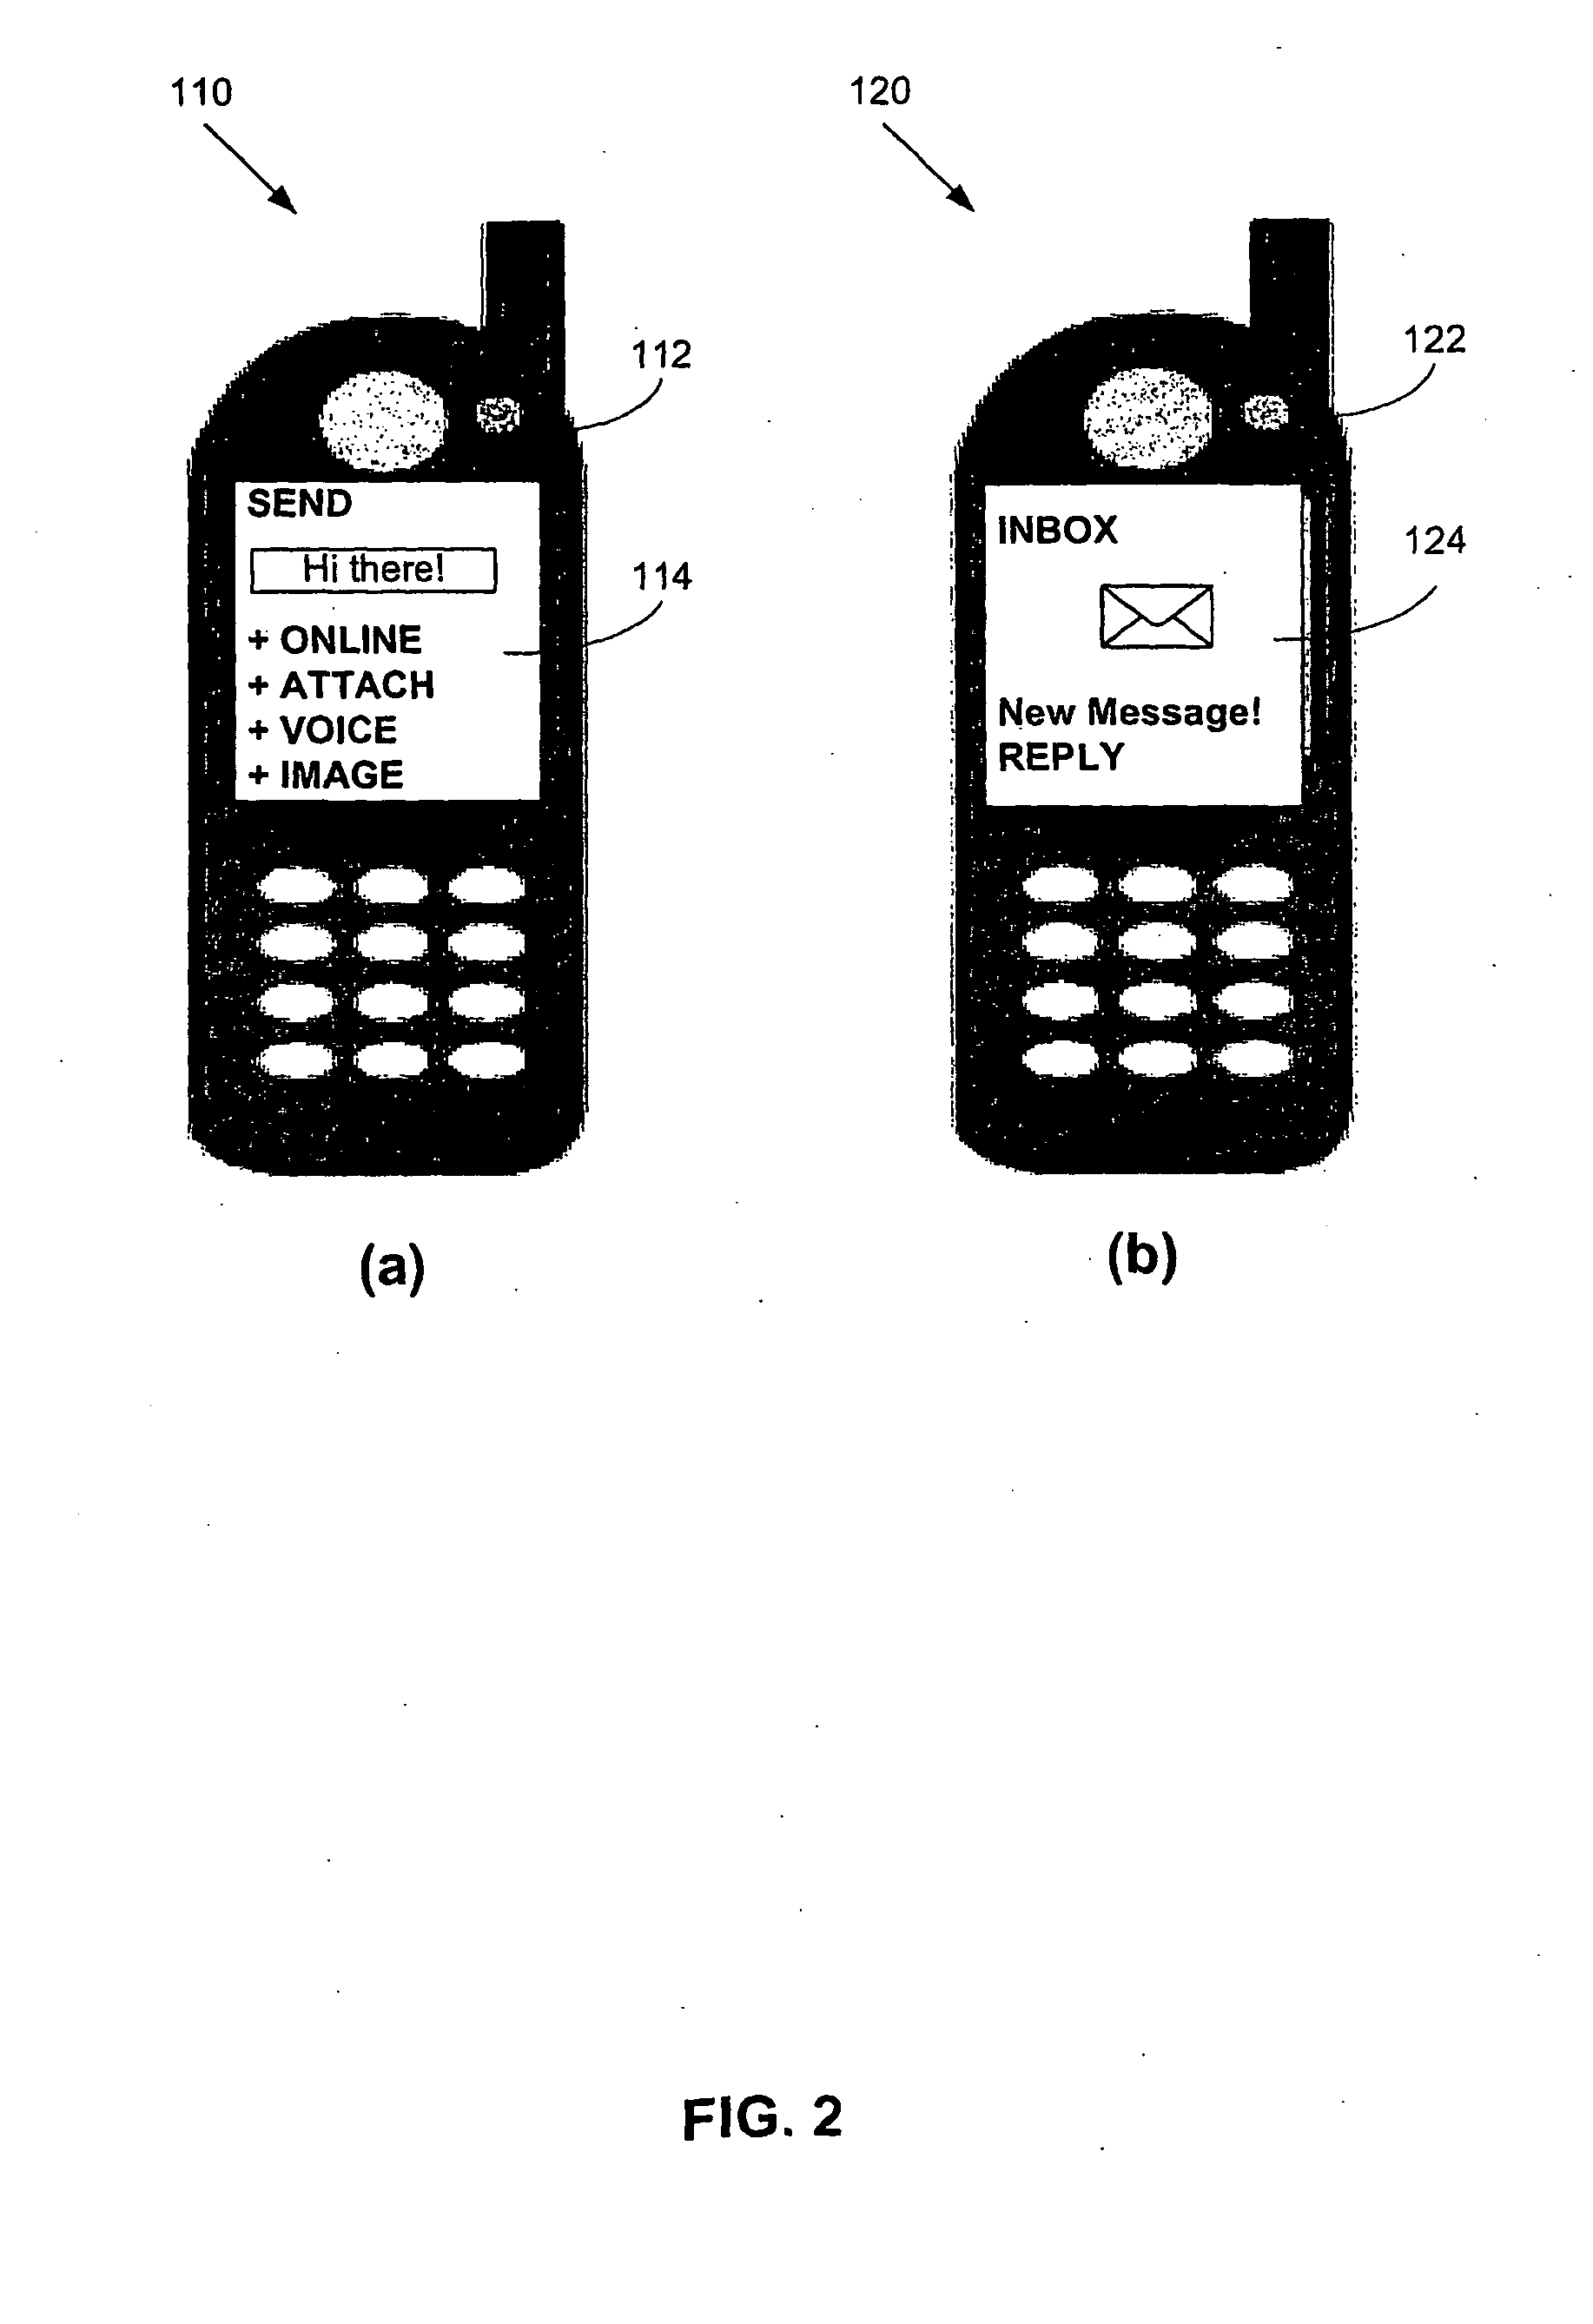 Messaging service in a wireless communications network